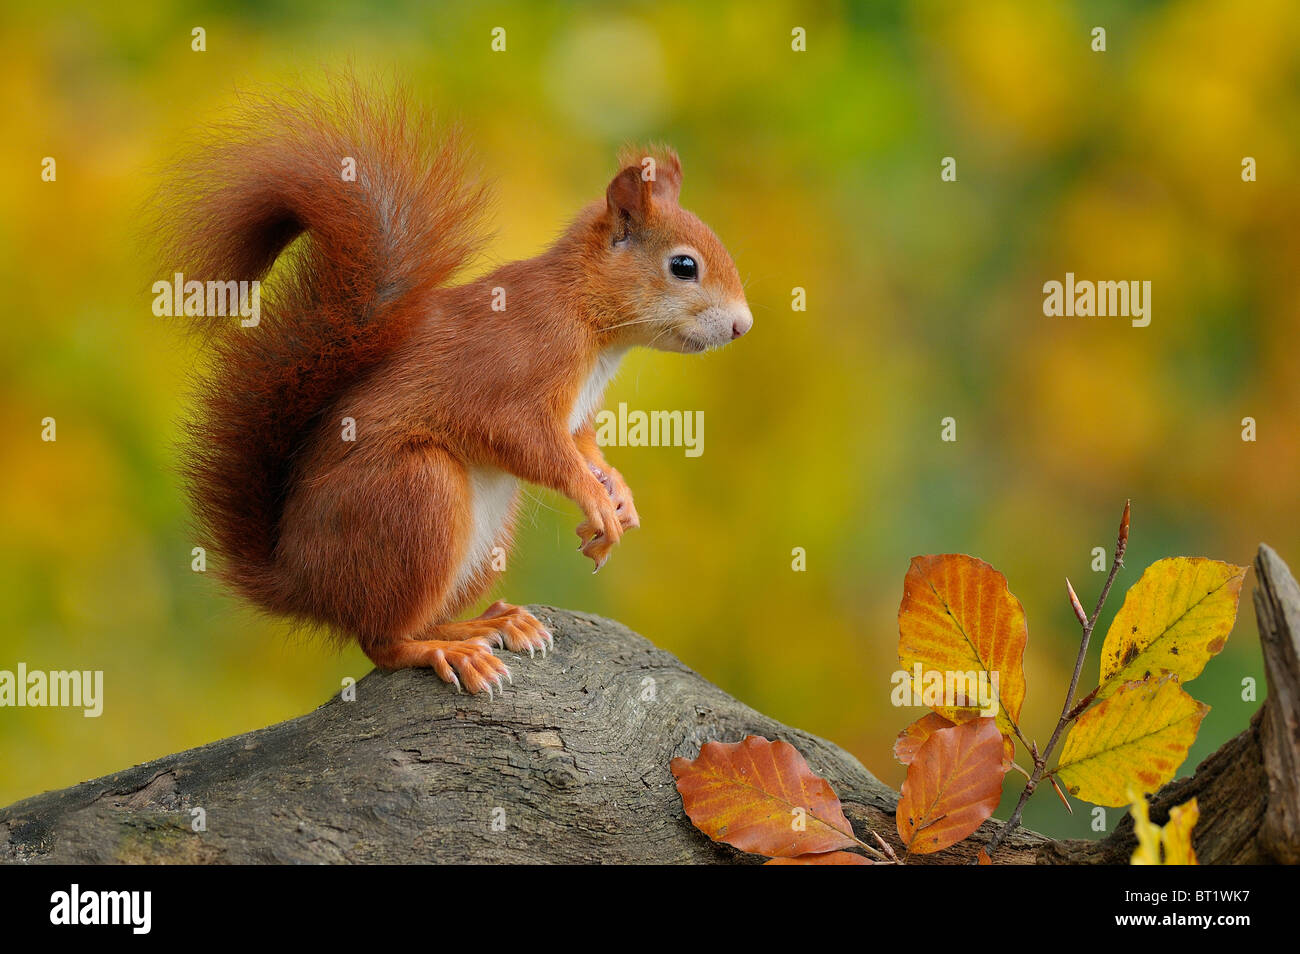 Red Squirrel (Sciurus vulgaris) standing on a tree stump while looking around, Netherlands. Stock Photo